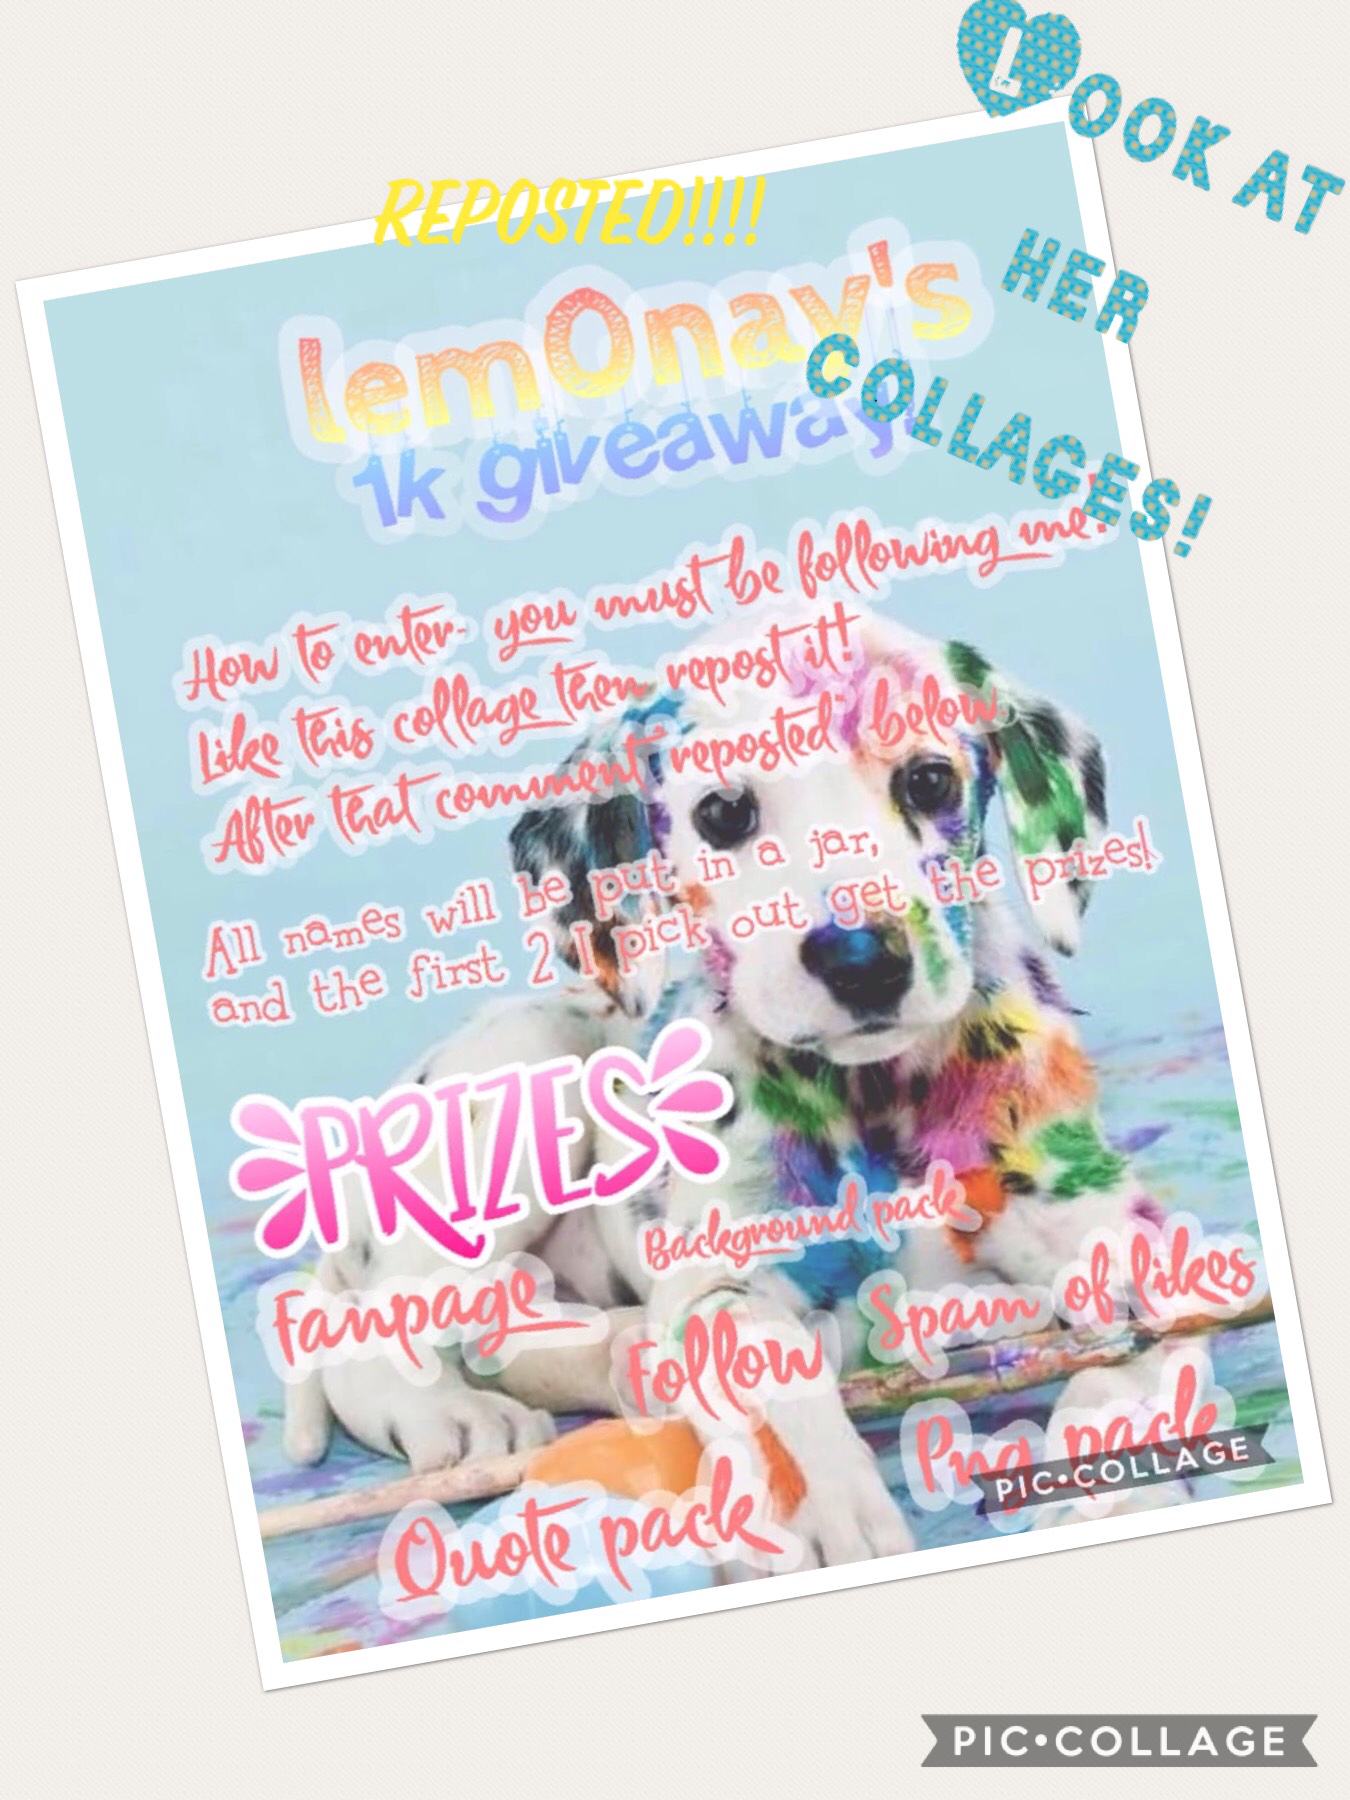 Check out LemOnays profile! She's got some great collages!